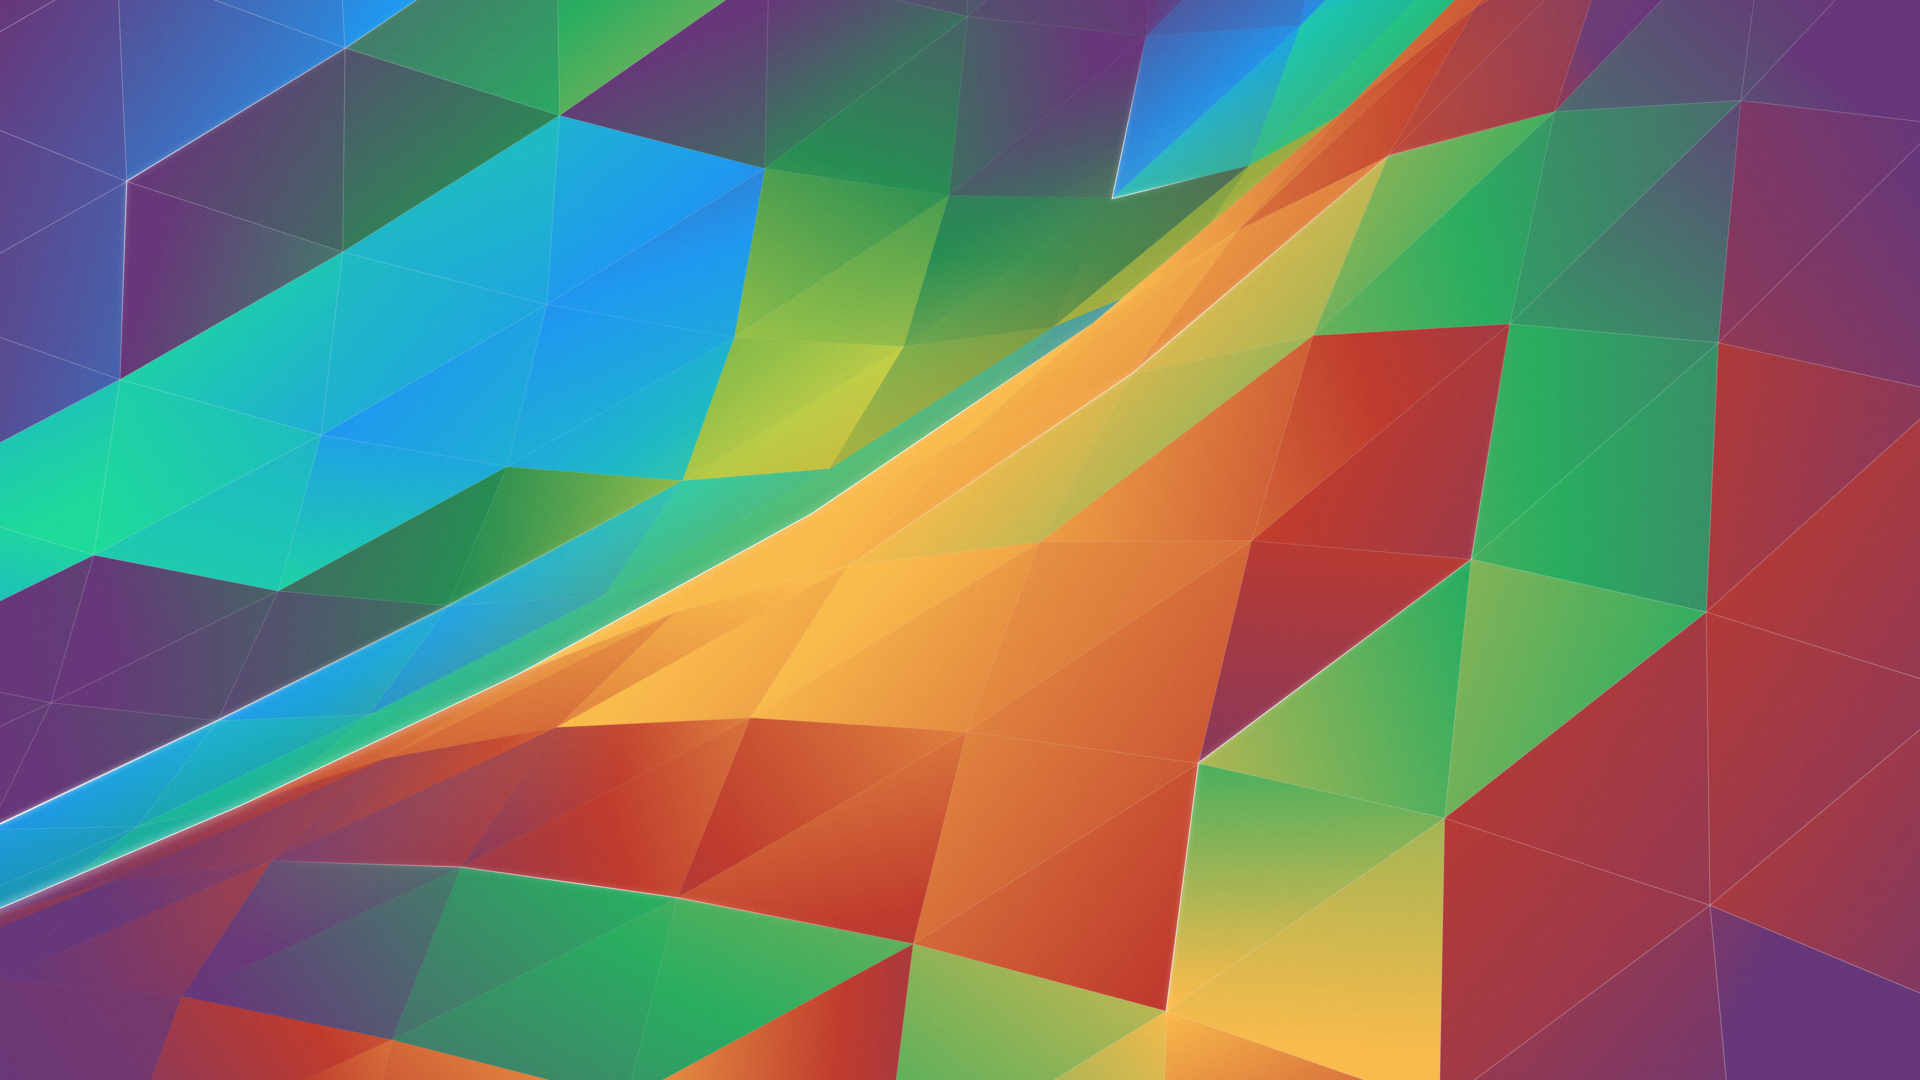 KDE Abstract Colorful Artwork Digital Art Geometry Triangle 1920x1080